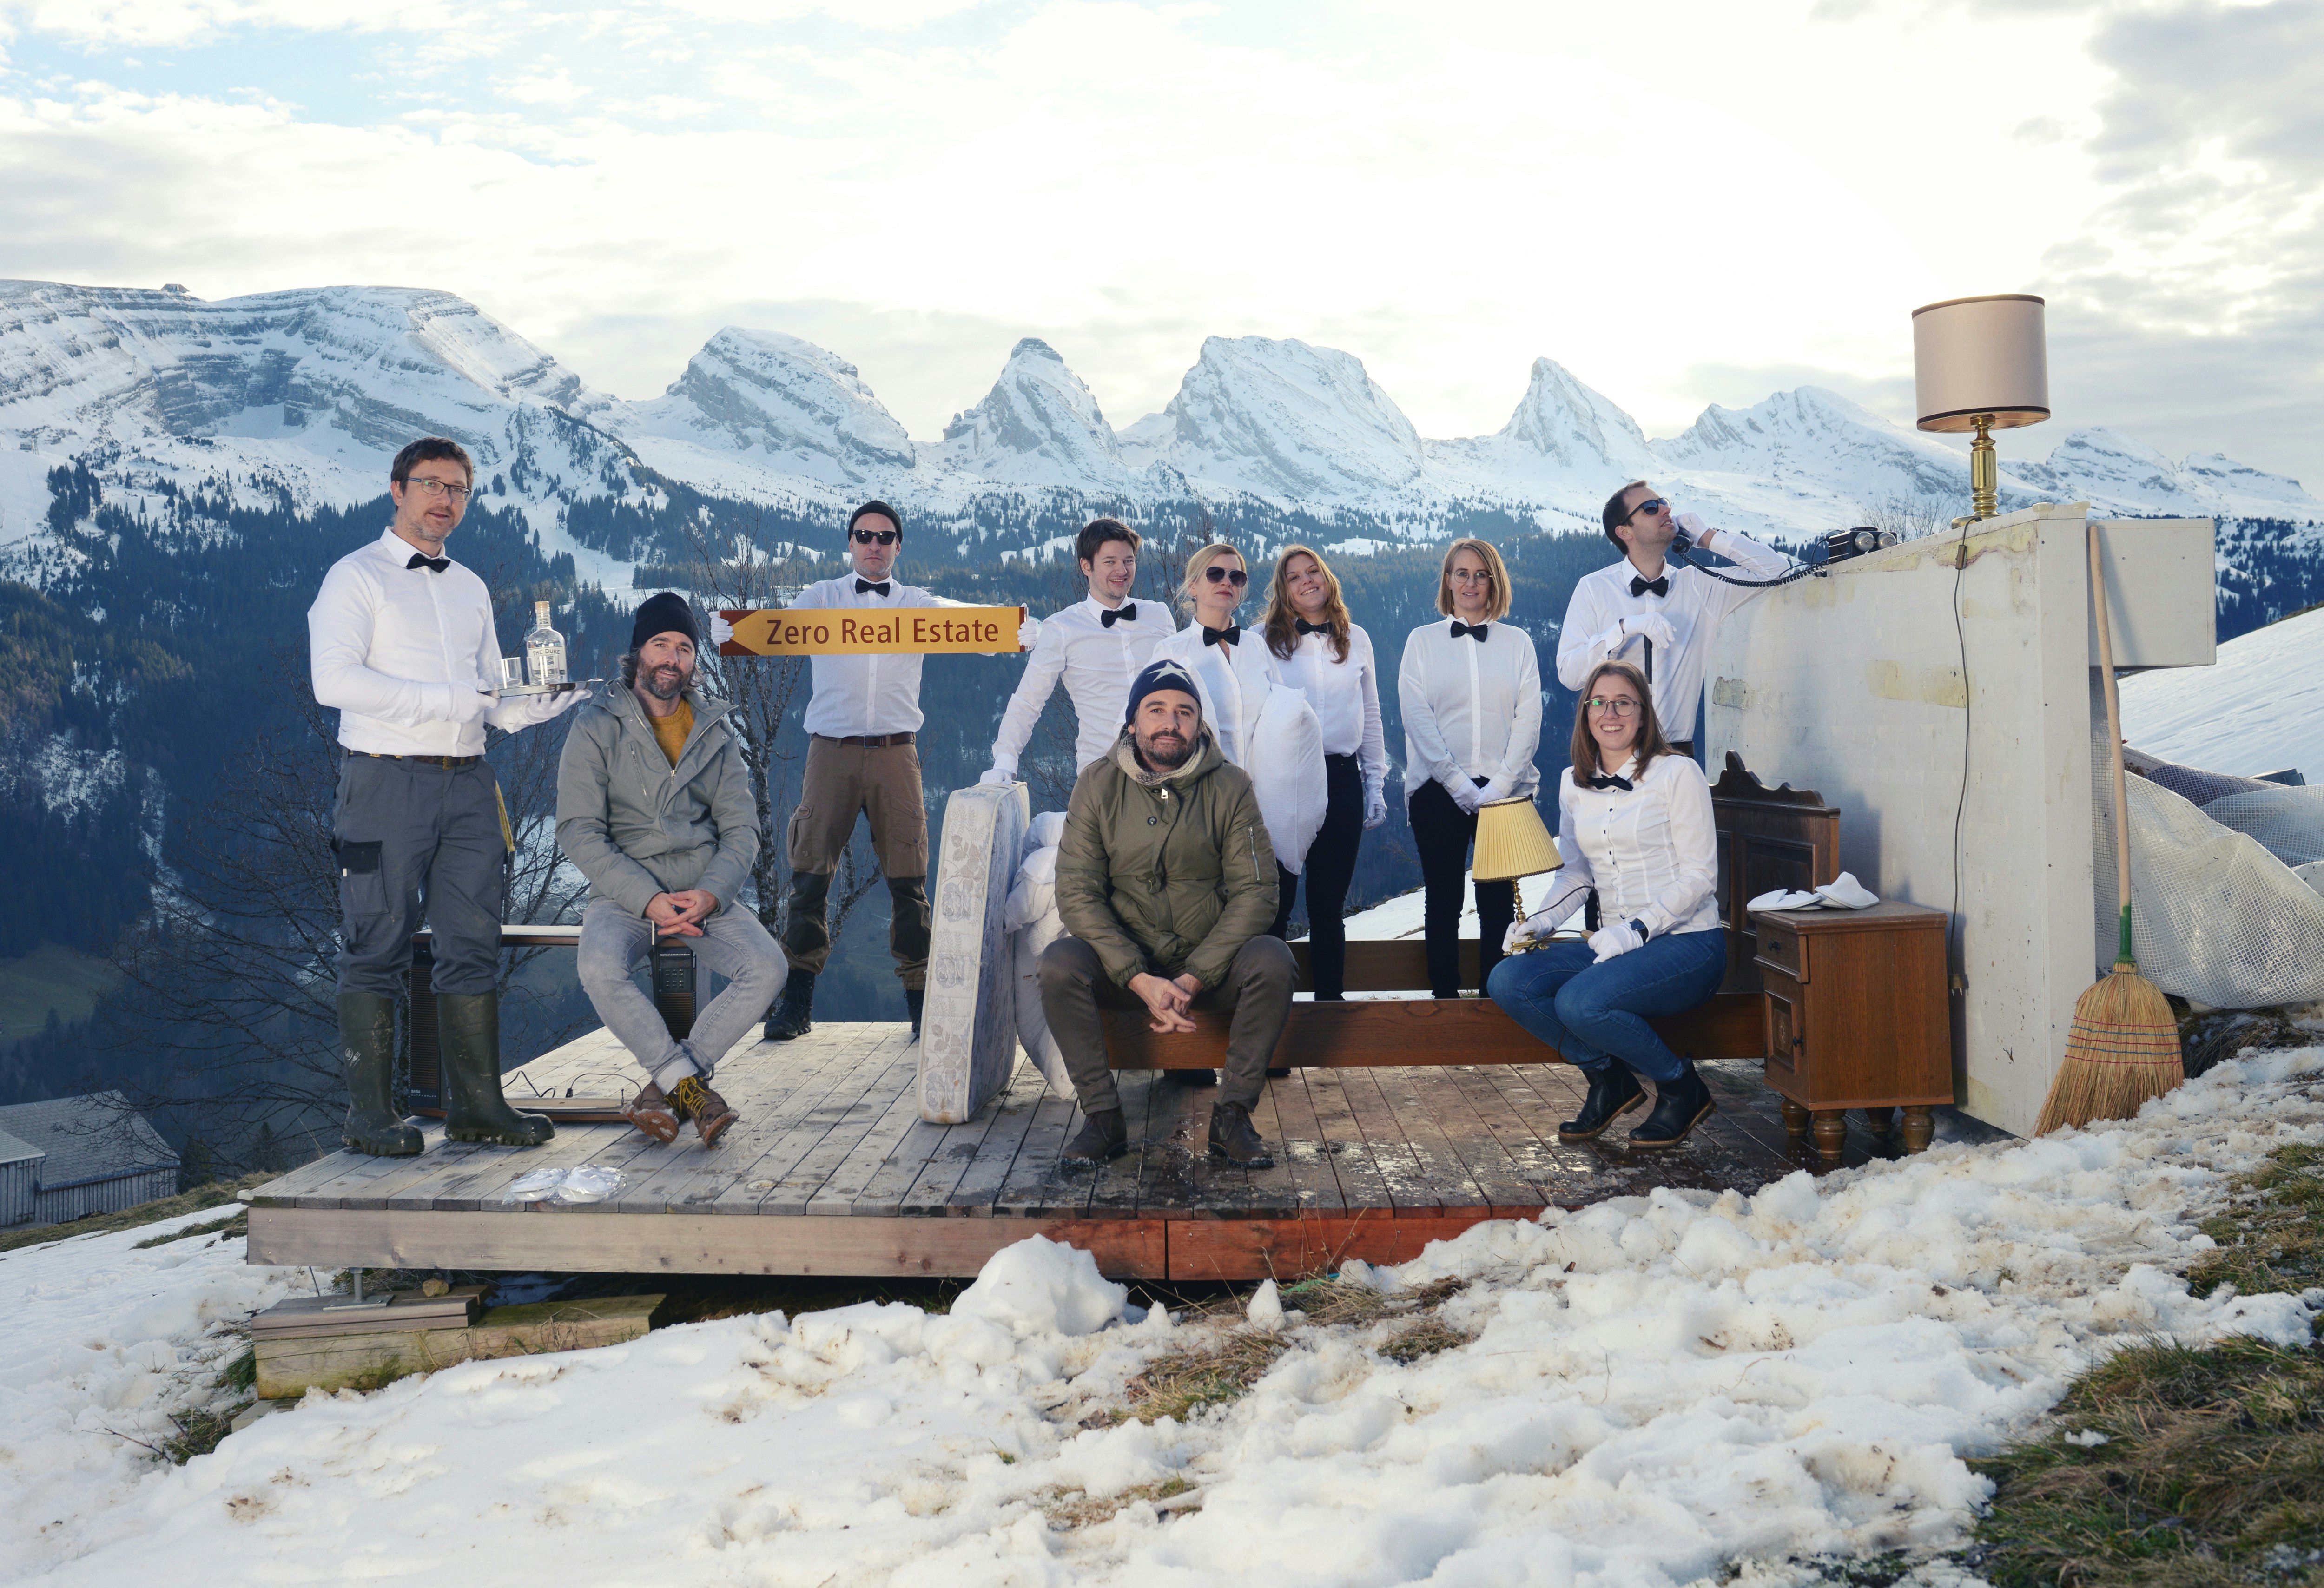 A group of people stand by a bed in the snowy Swiss Alps